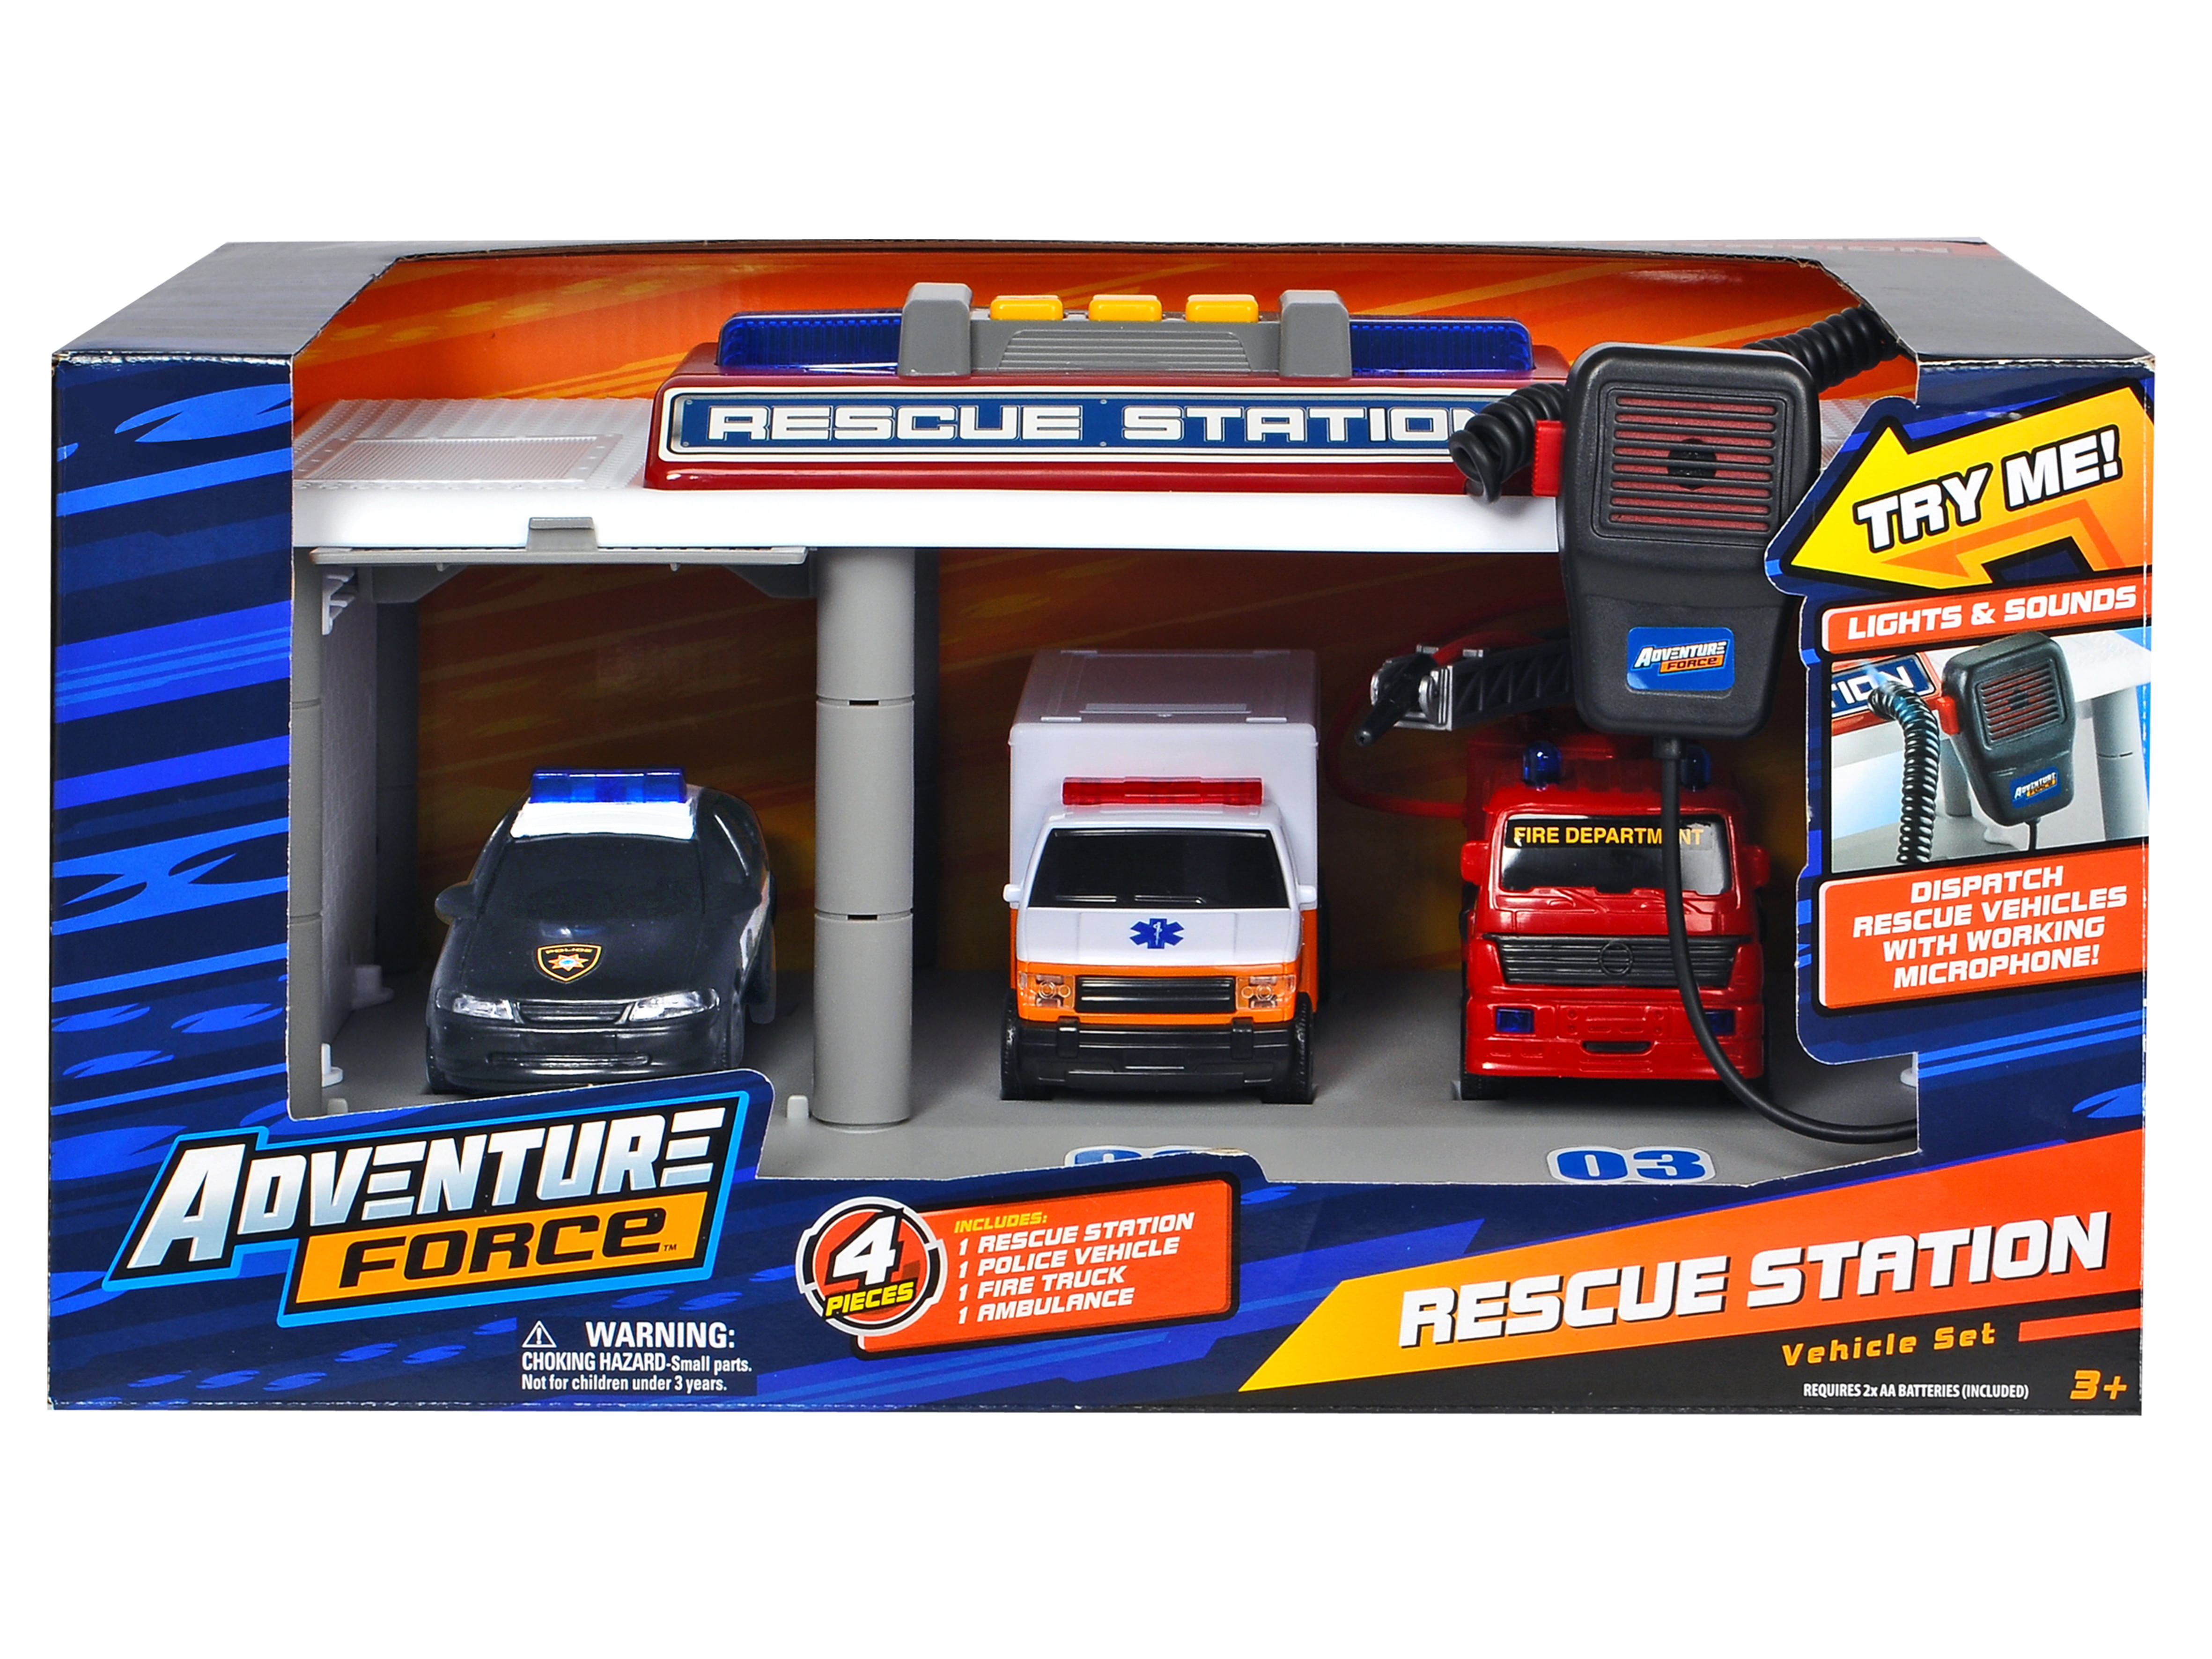 Adventure Force Rescue Station 